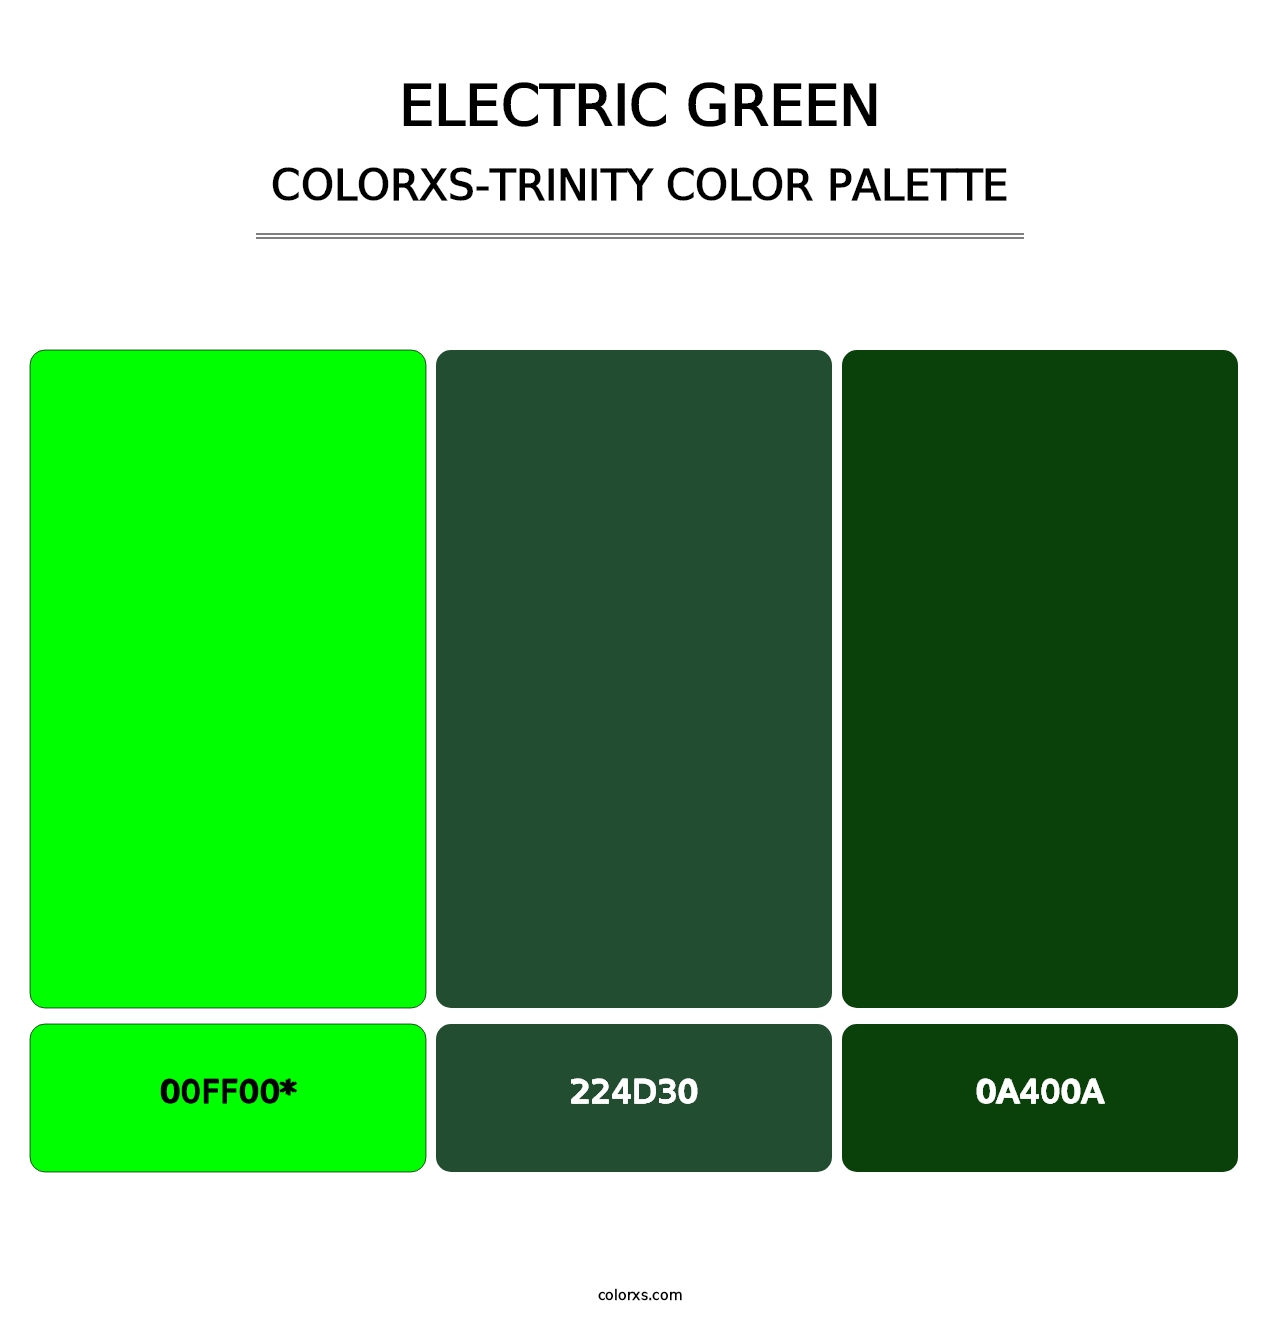 Electric Green - Colorxs Trinity Palette